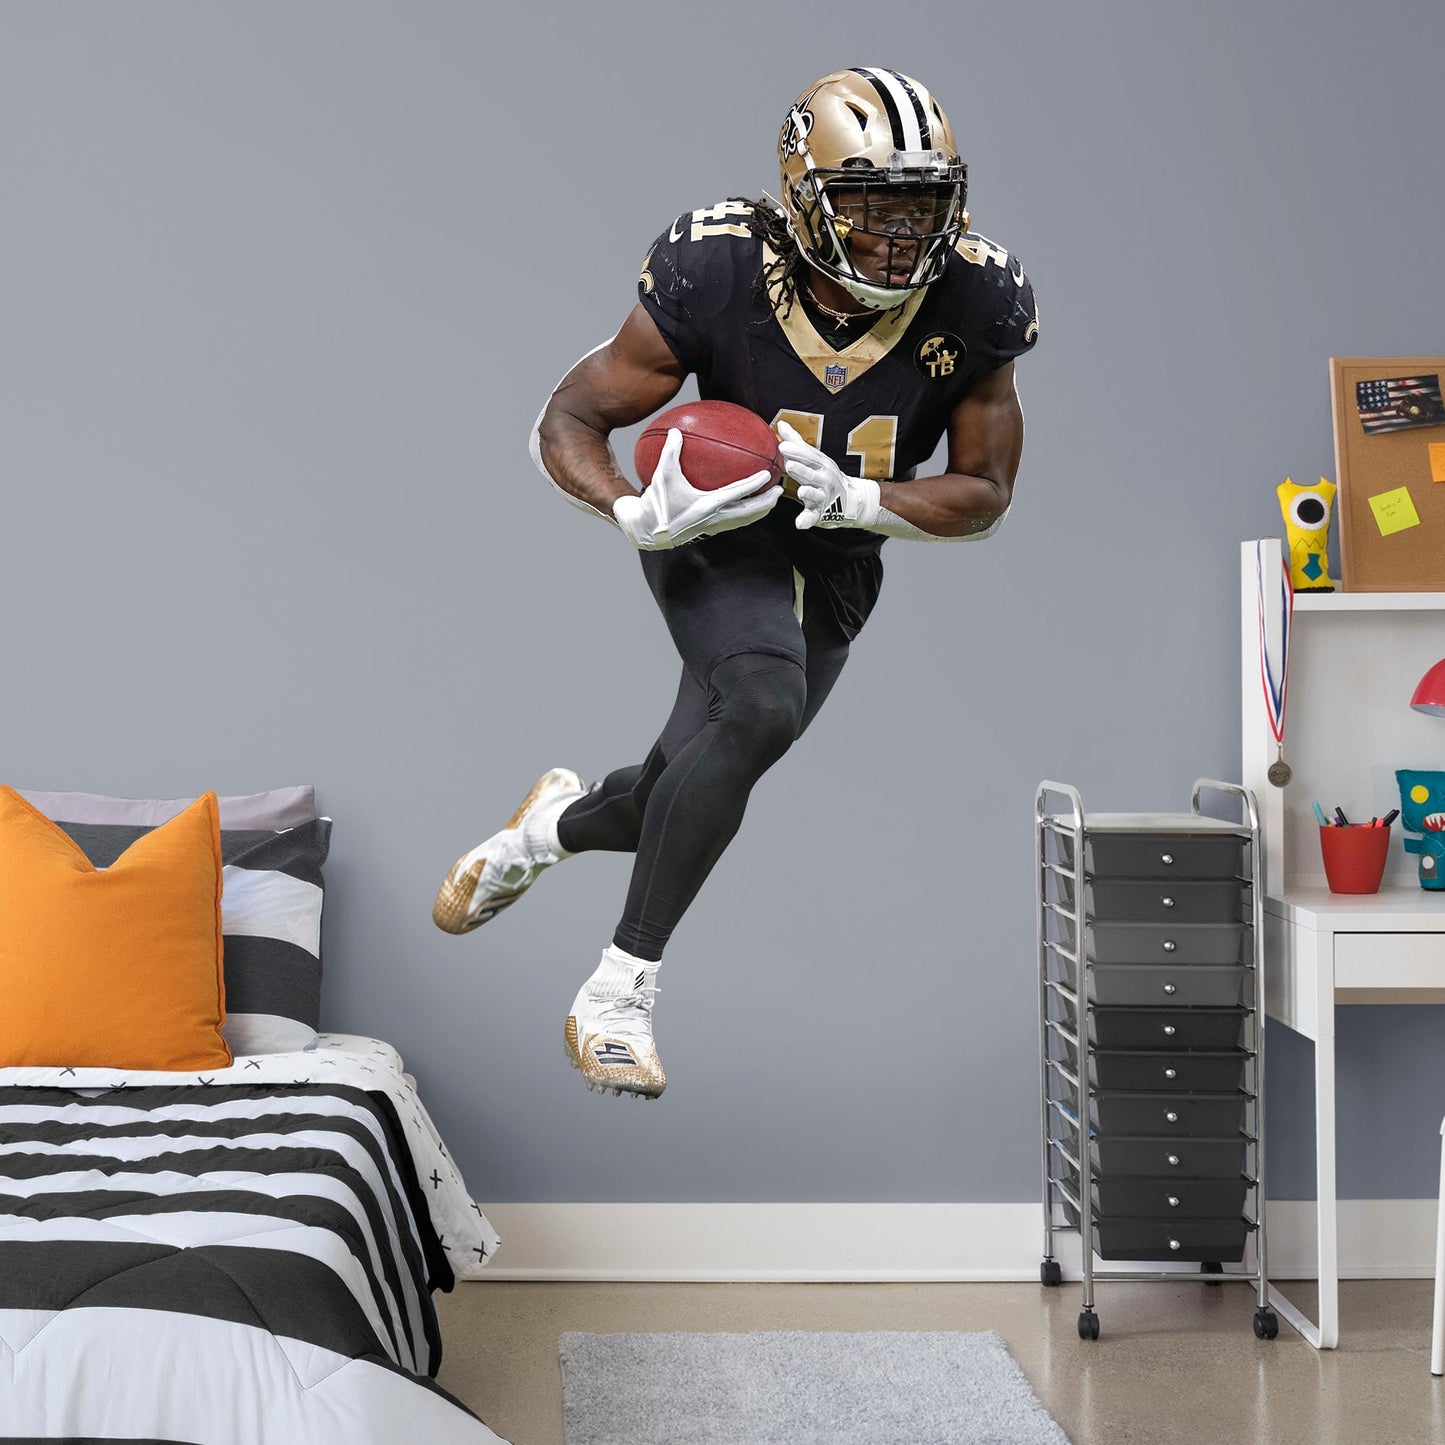 Large Athlete + 2 Decals (10"W x 17"H) Who Dat! Running back Alvin Kamara of the New Orleans Saints had a stellar start to his NFL career with an impressive 32 TDs in his first two seasons - an MVP in the making. Deck your walls in black and gold with a high-grade vinyl decal of the Saints' #41. It won't fade or tear, so remove it and reuse it wherever you watch the big game. Geaux Saints!